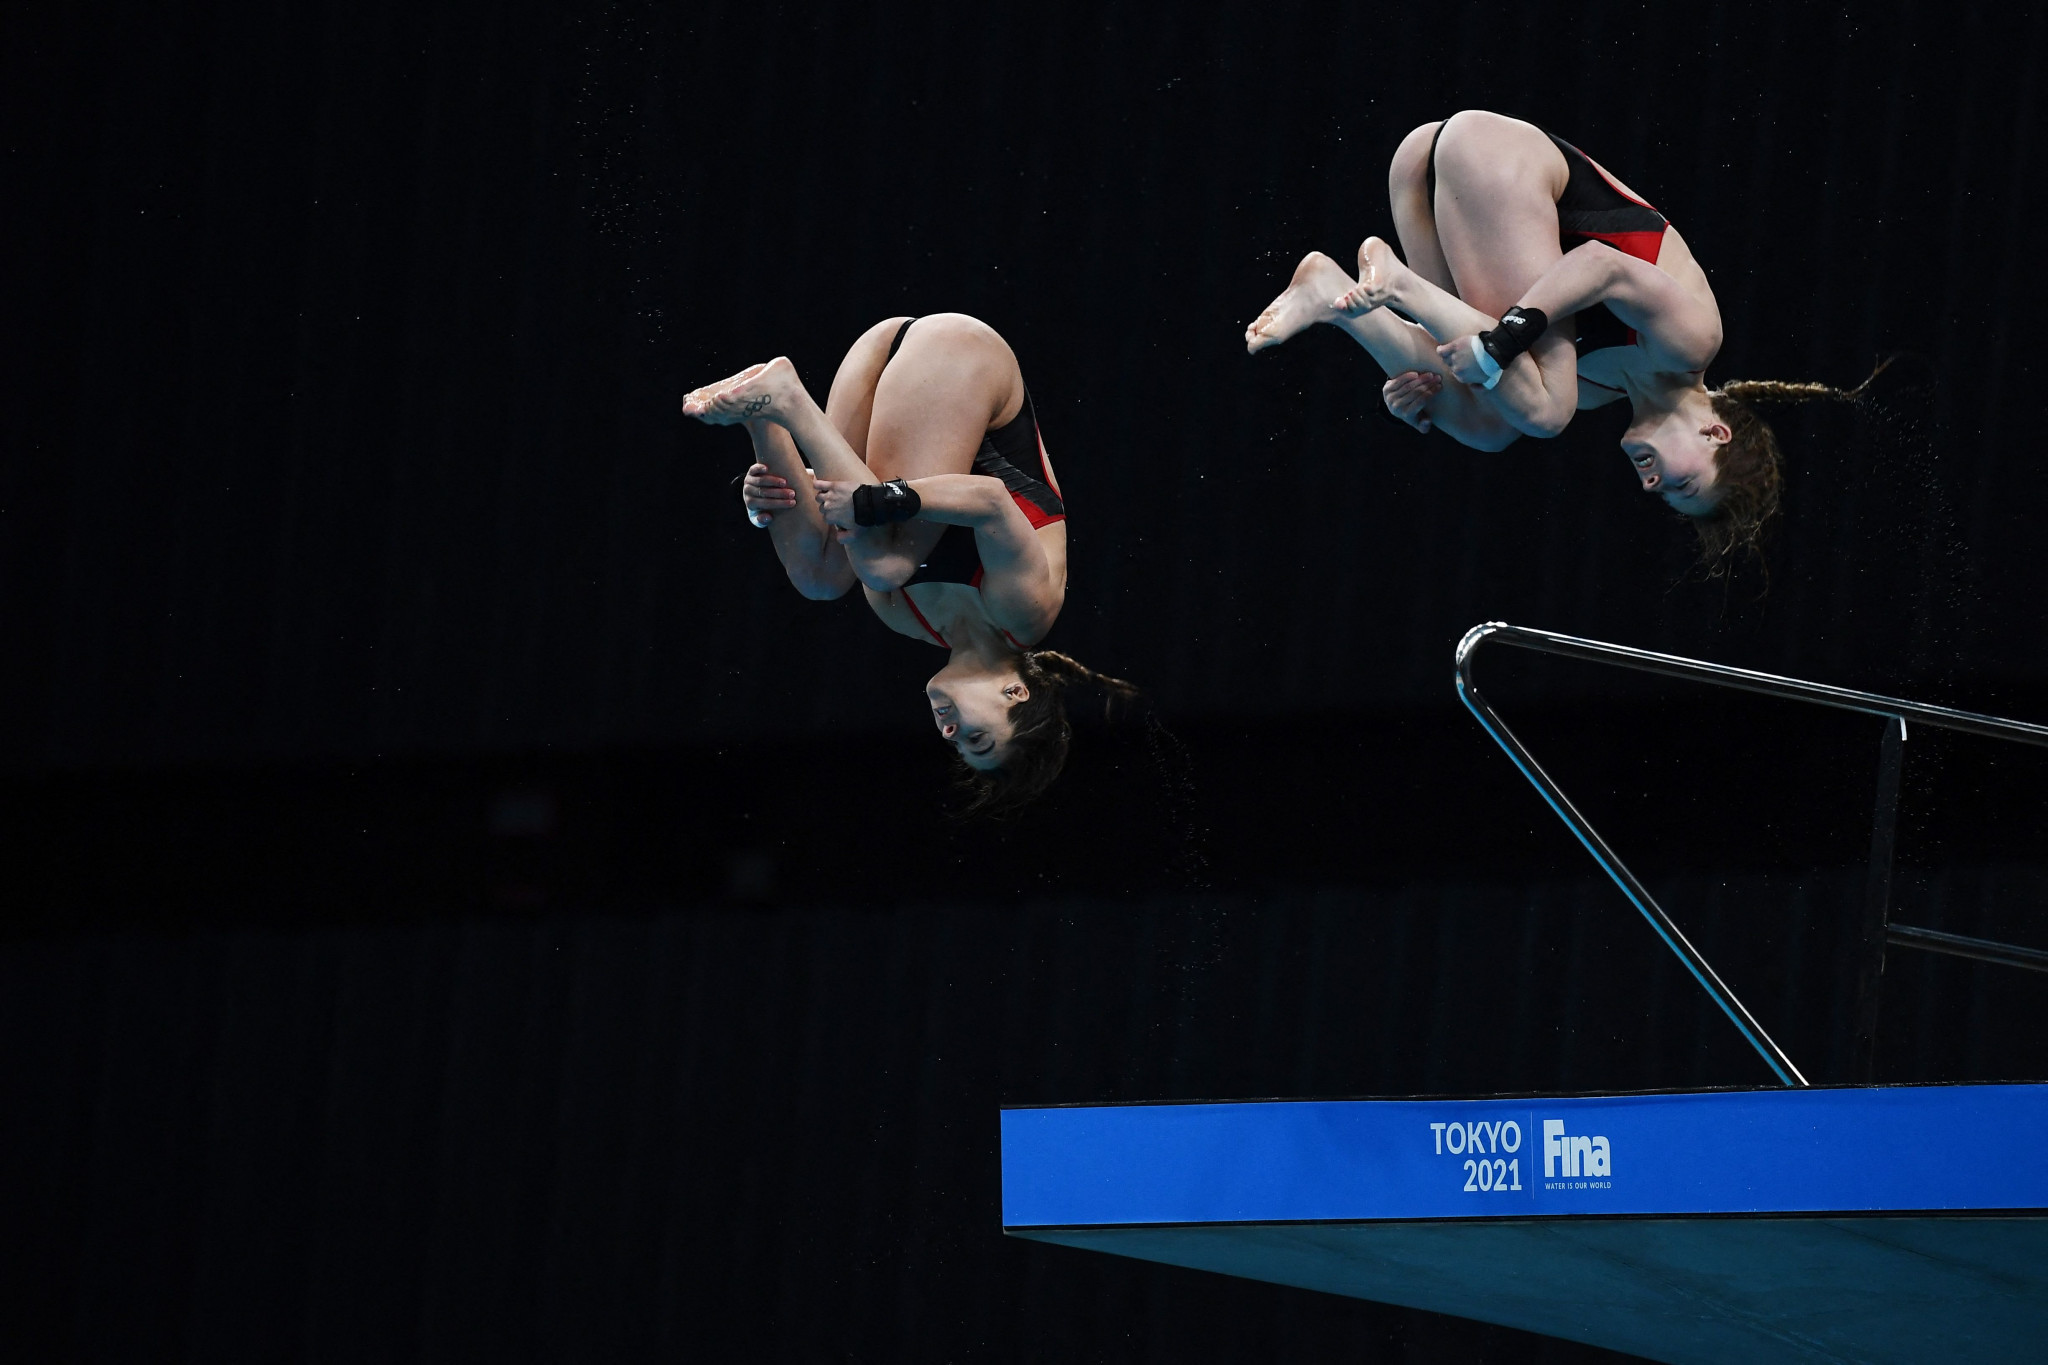 Meaghan Benfeito and Caeli McKay sealed gold in the women's synchronised 10m platform in Tokyo ©Getty Images